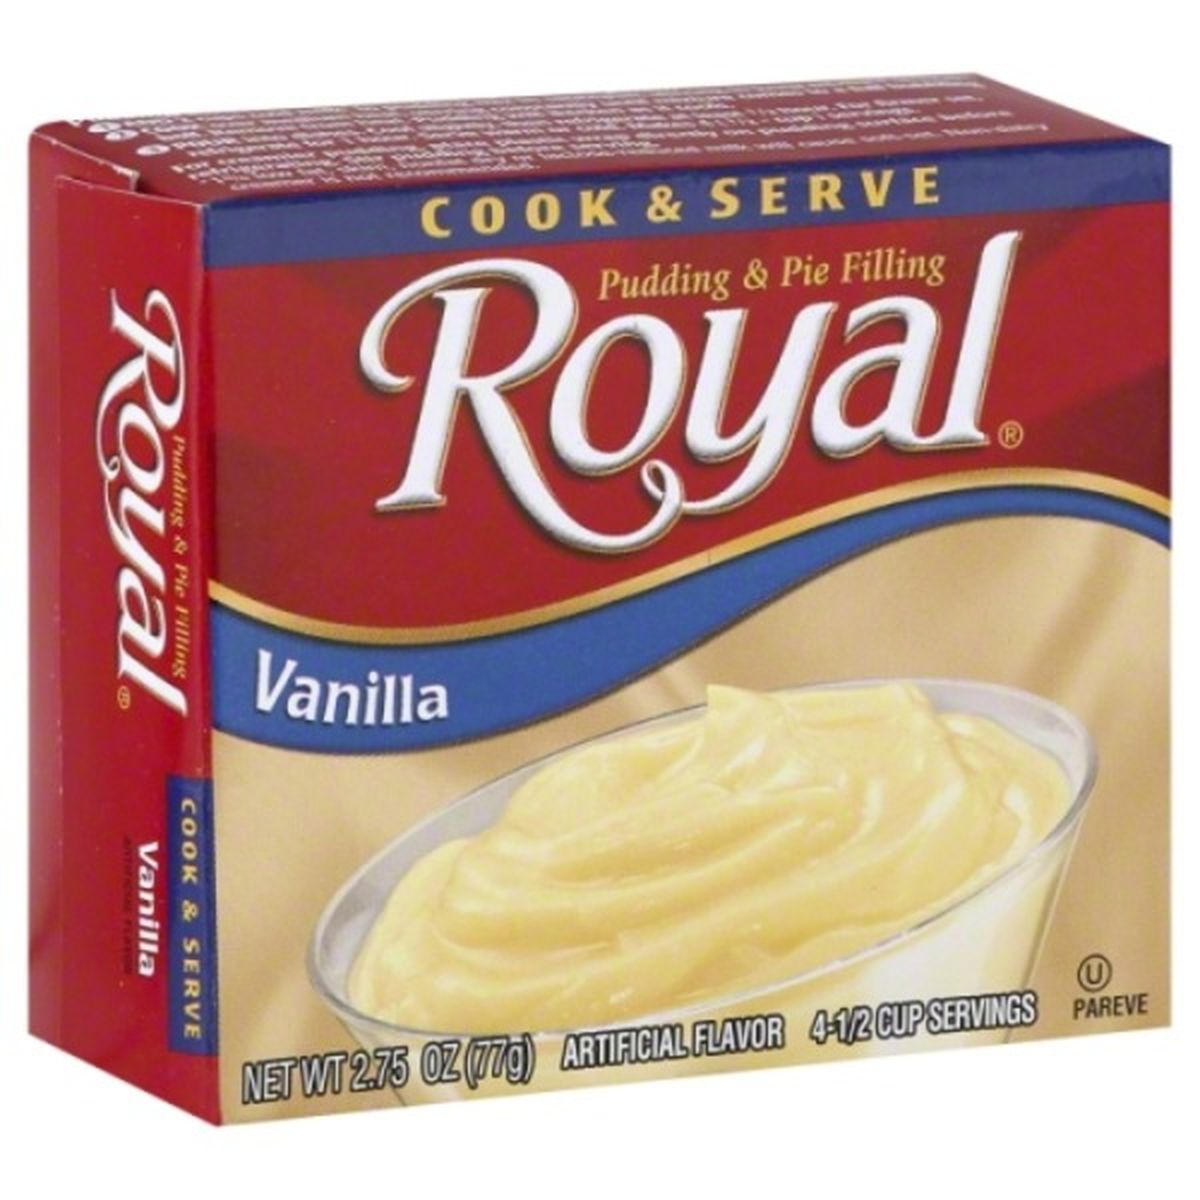 Calories in Royal Pudding & Pie Filling, Cook & Serve, Vanilla